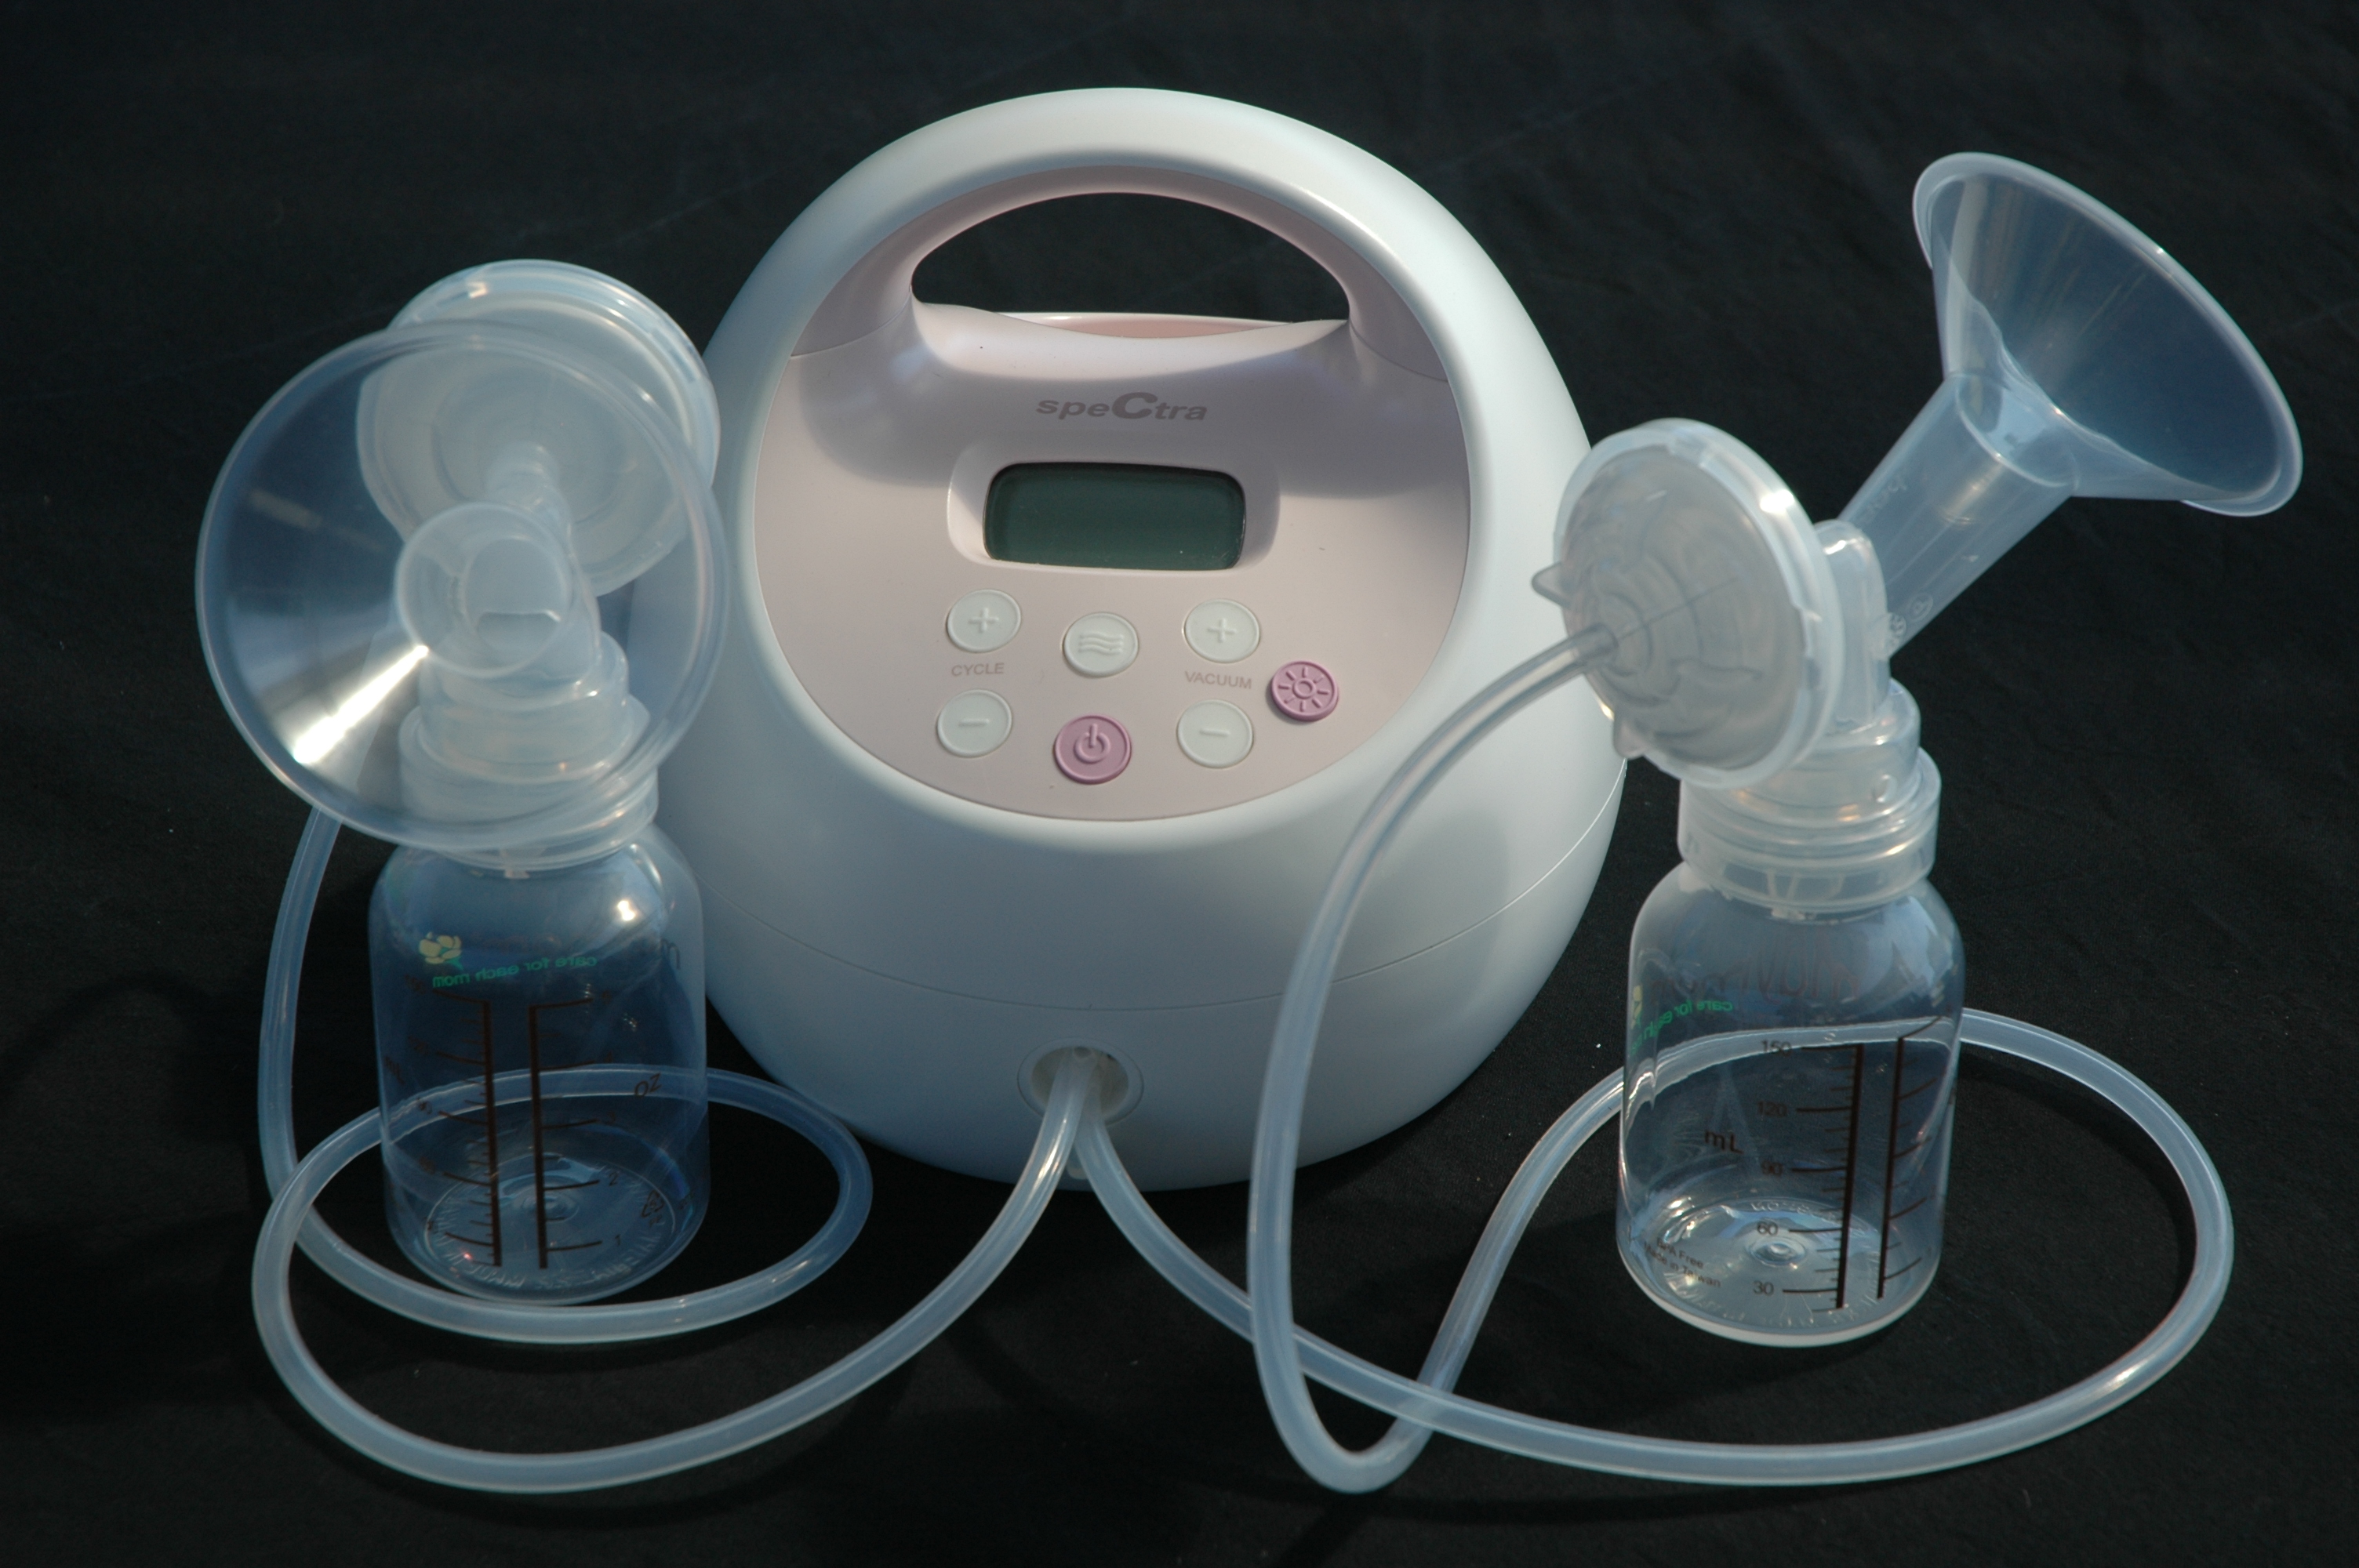 Spectra Baby USA S1 Hospital Grade Double/Single Electric Breast Pump - Rechargeable Battery